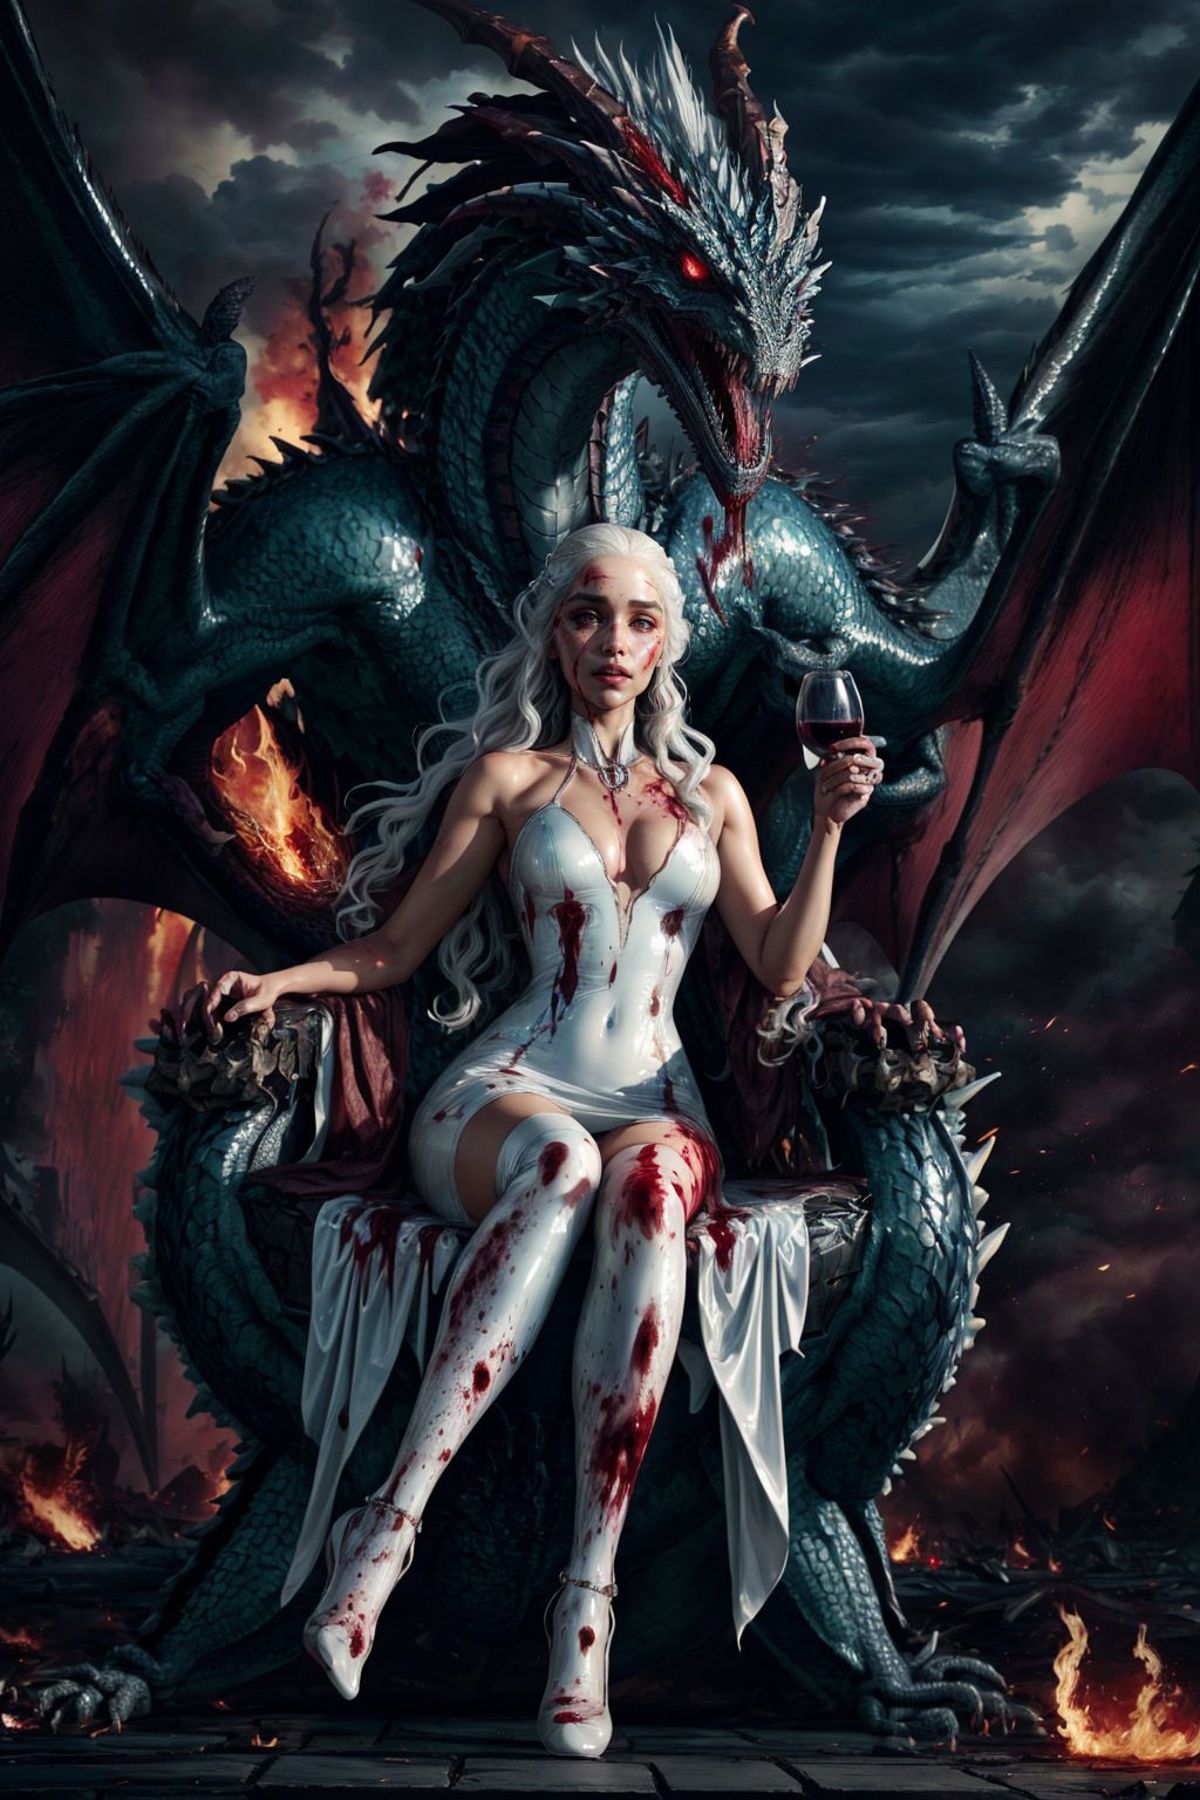 A painting of a woman wearing a white dress and holding a wine glass while sitting on a dragon.